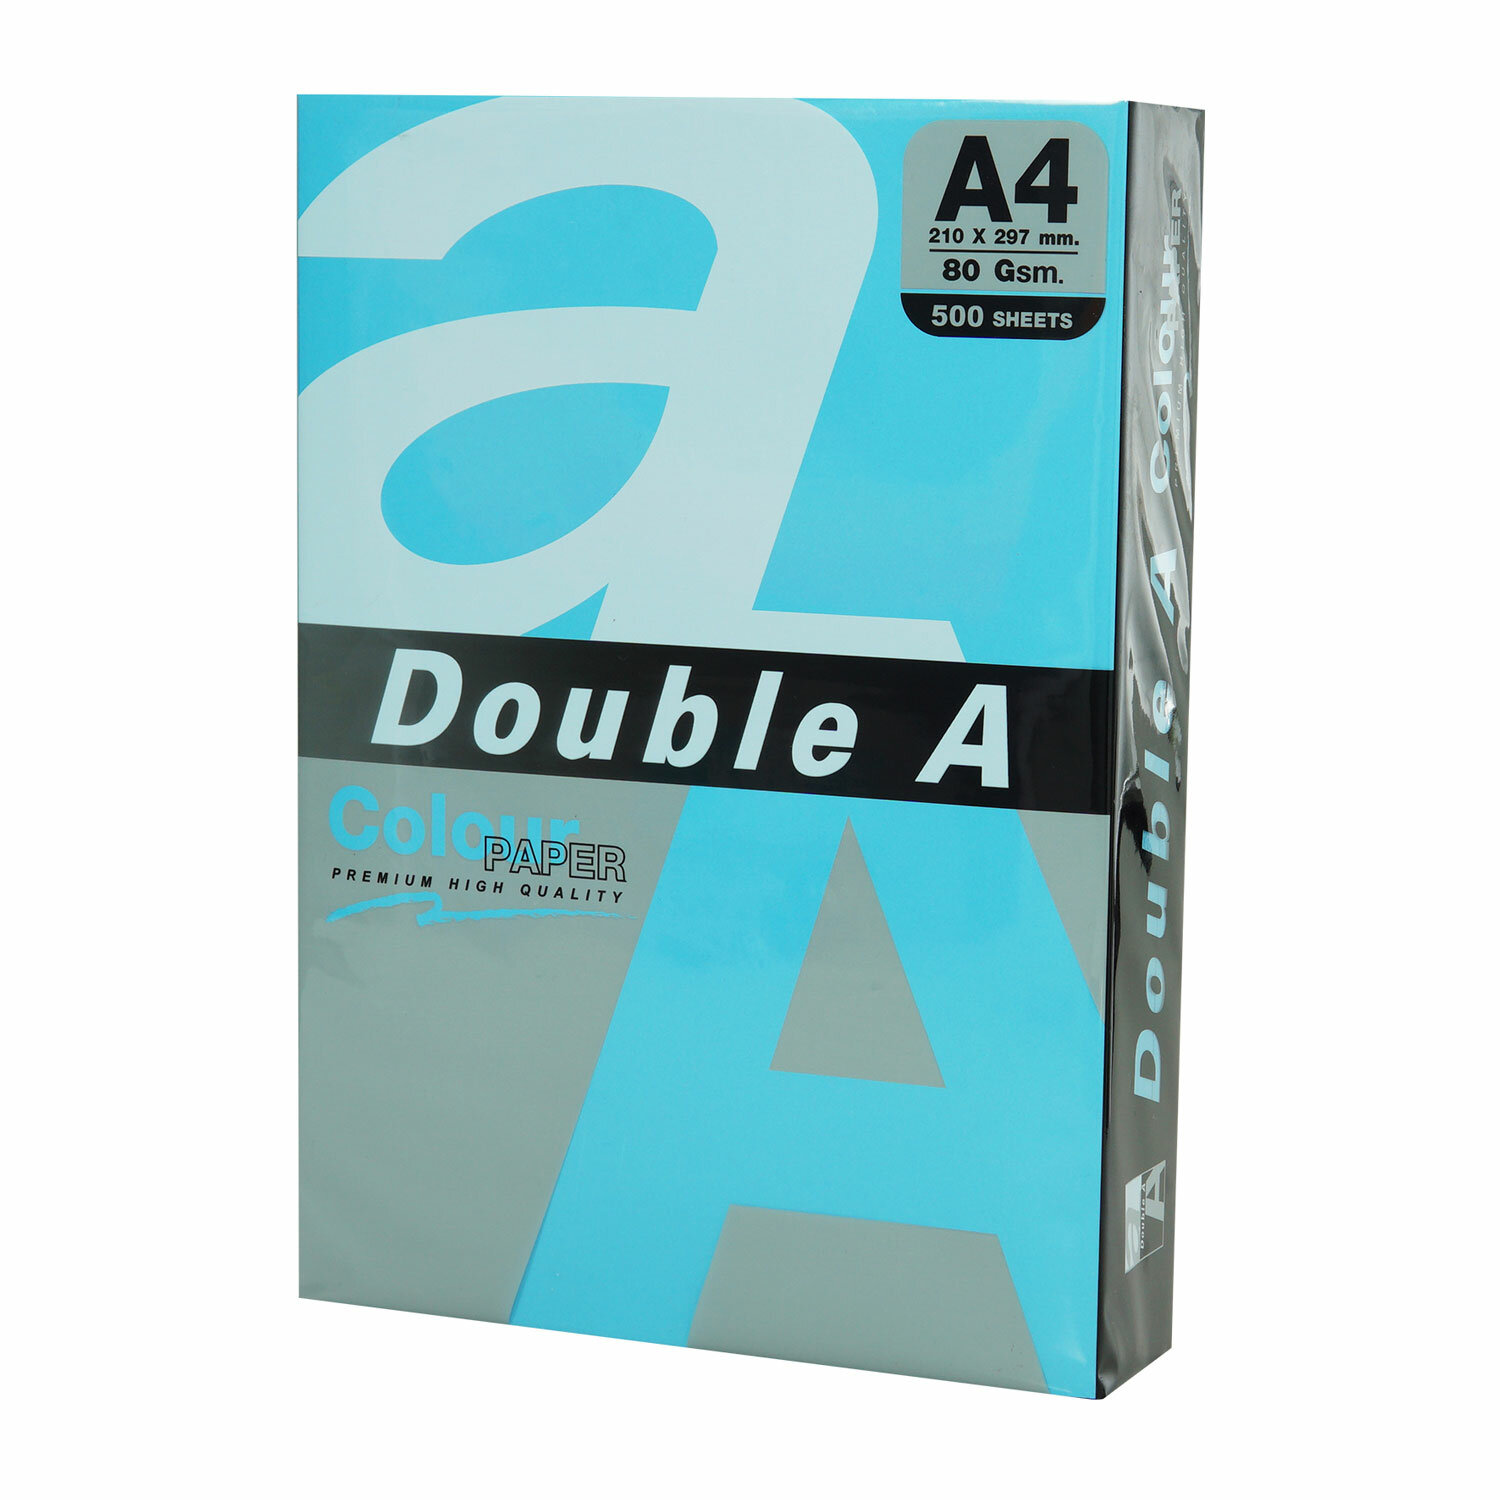   DOUBLE A 4, 80 /2, 500 ., , 